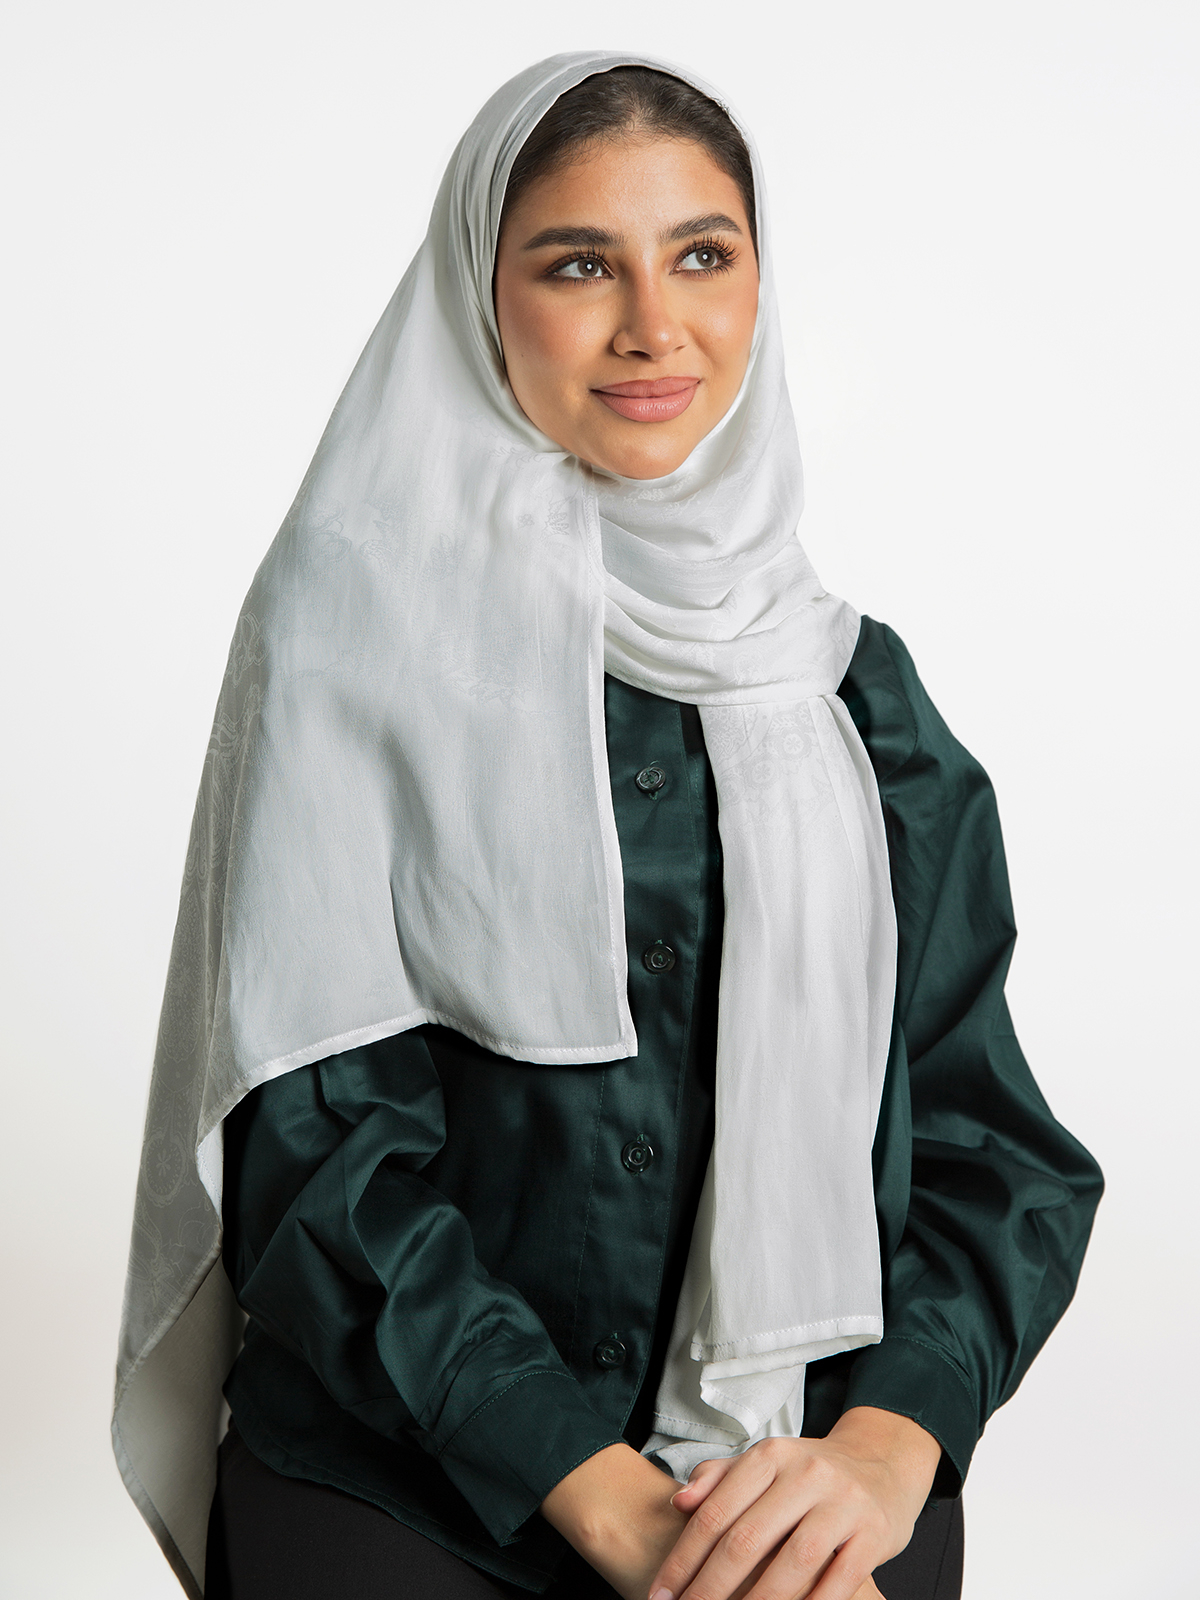 White soft and breathable ornamented hijab tarha by kaafmeem for daily wear available in multiple colors